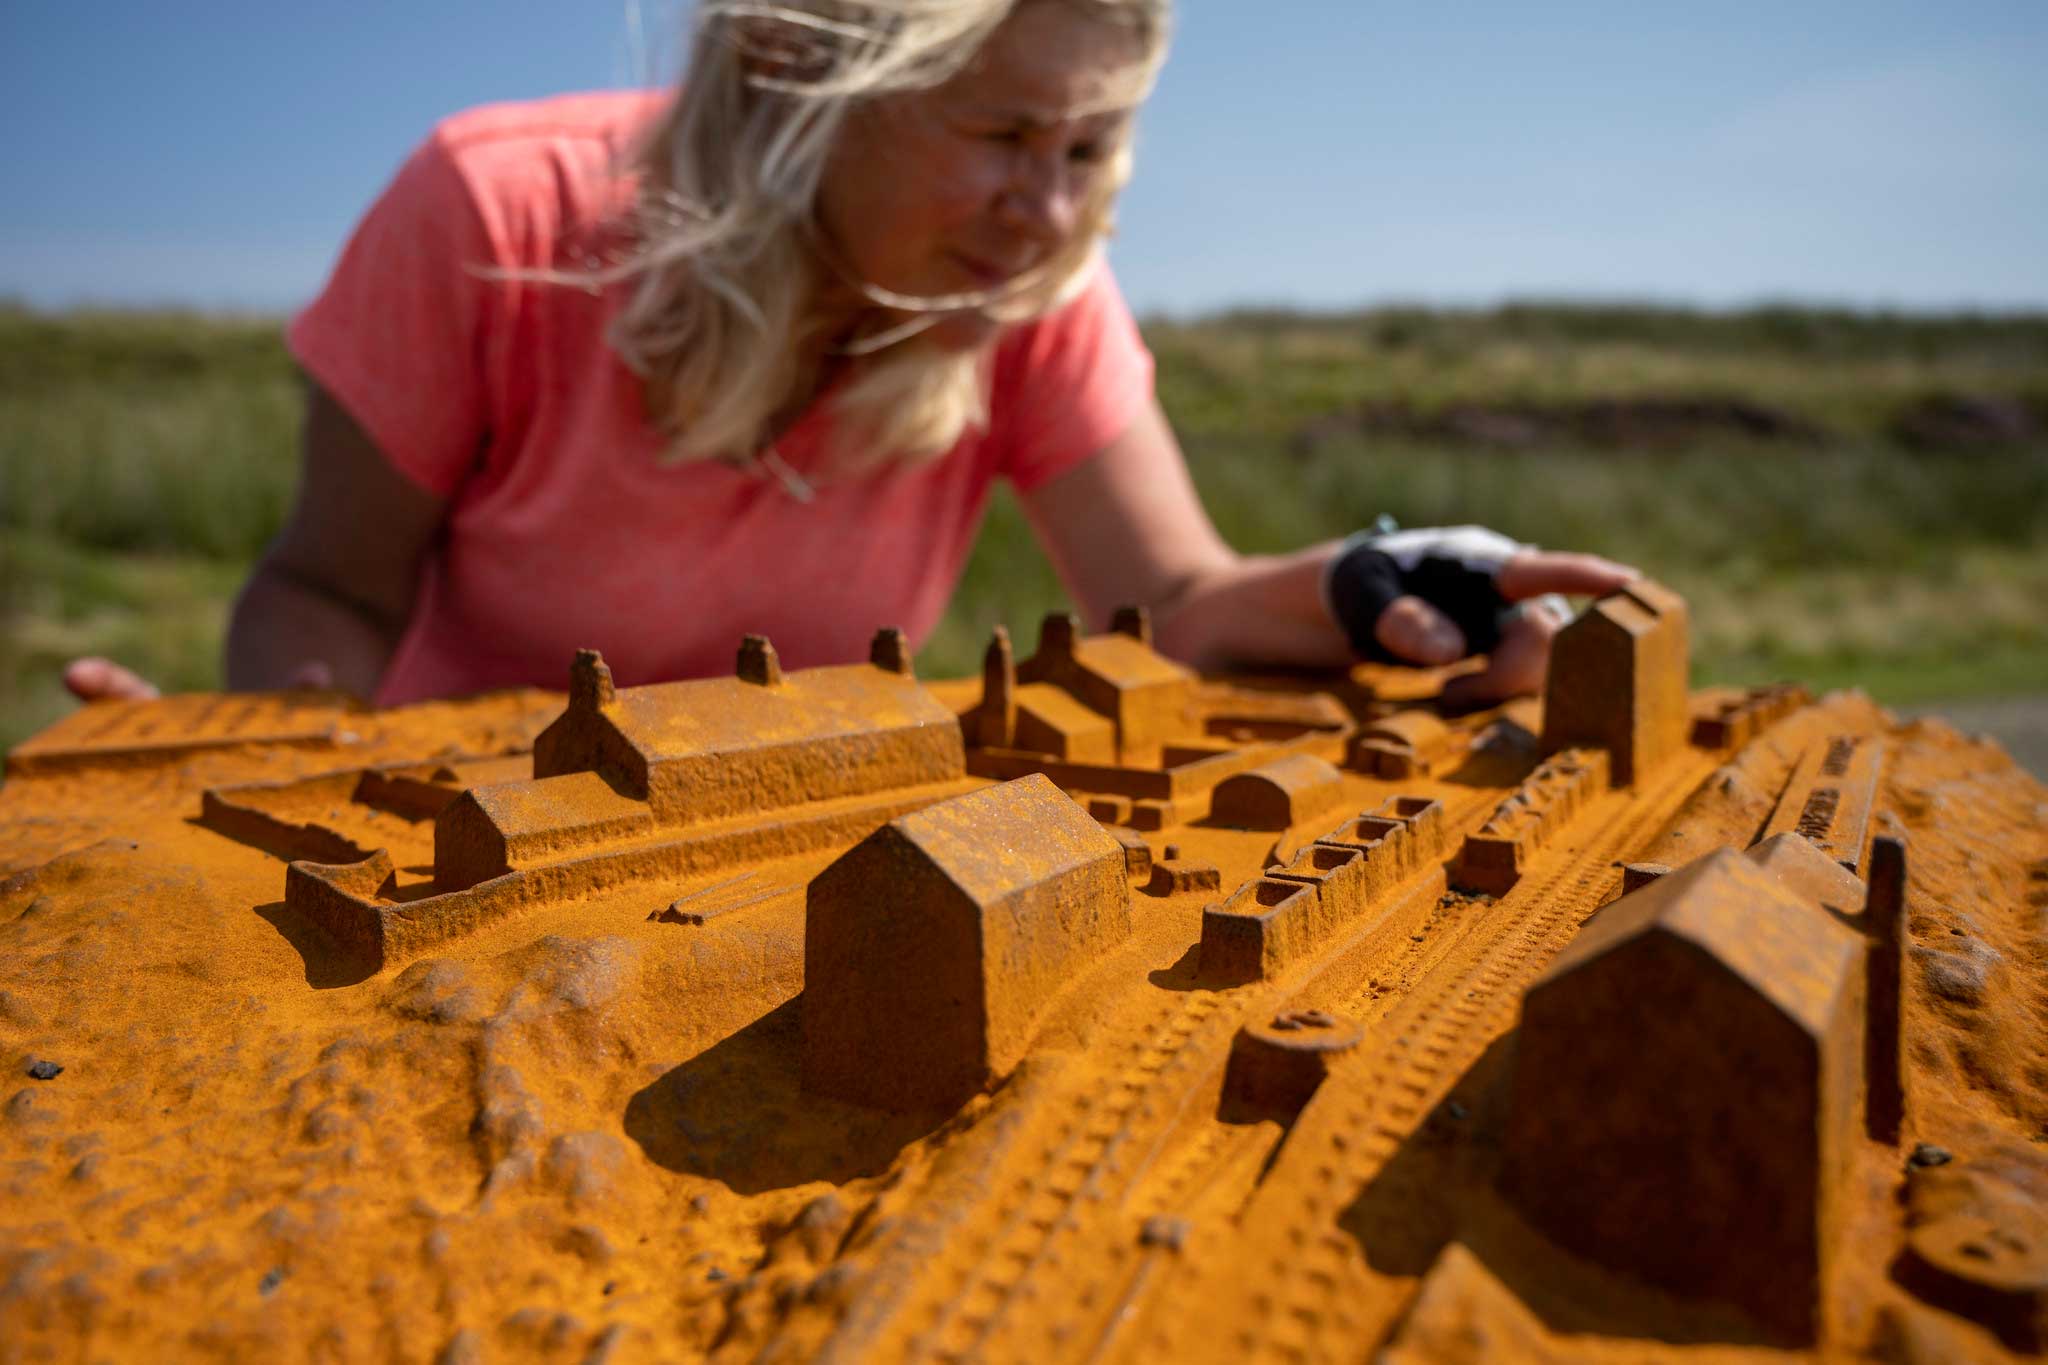 Photo of a cyclist looking closely at a cast iron model in a rural landscape